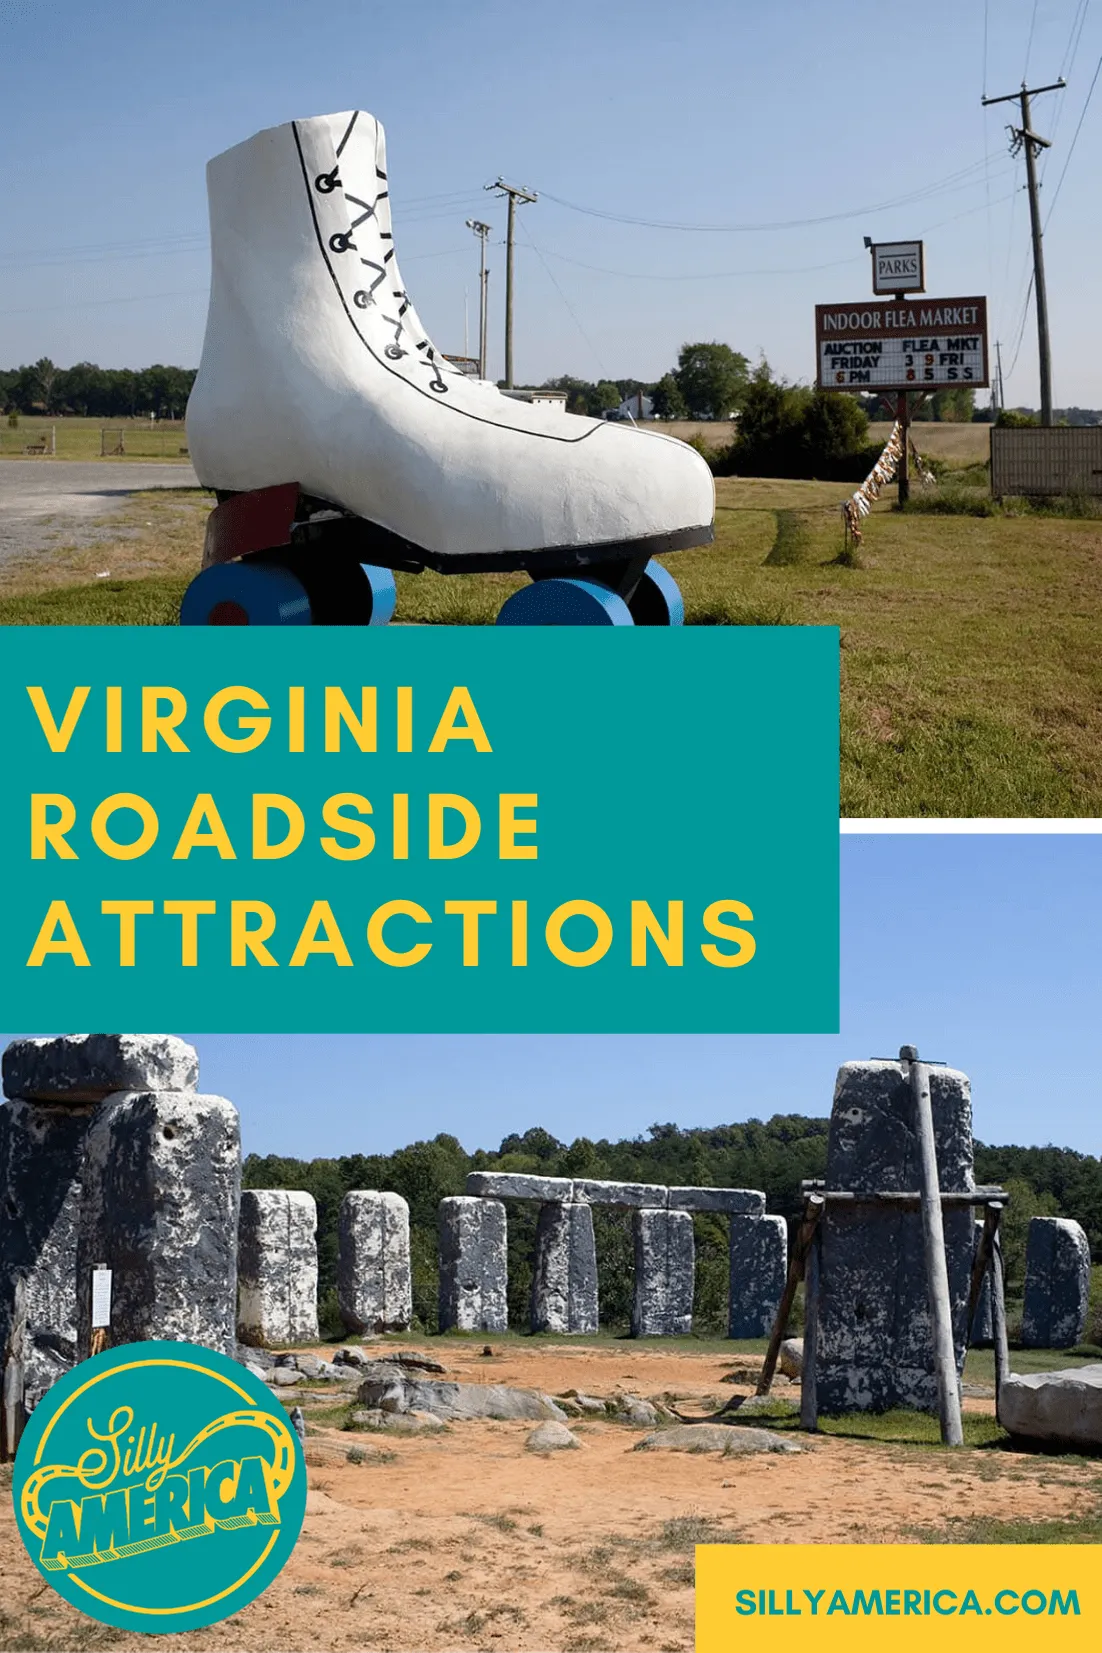 The best Virginia roadside attractions to visit on a Virginia road trip. Add these roadside oddities to your travel bucket list, itinerary, or route map! Fun road trip stops for kids or adults!  #VirginiaRoadsideAttractions #VirginiaRoadsideAttraction #RoadsideAttractions #RoadsideAttraction #RoadTrip #VirginiaRoadTrip #VirginiaRoadTripBucketLists #VirginiaBucketList #VirginiaRoadTripIdeas #WeirdRoadsideAttractions